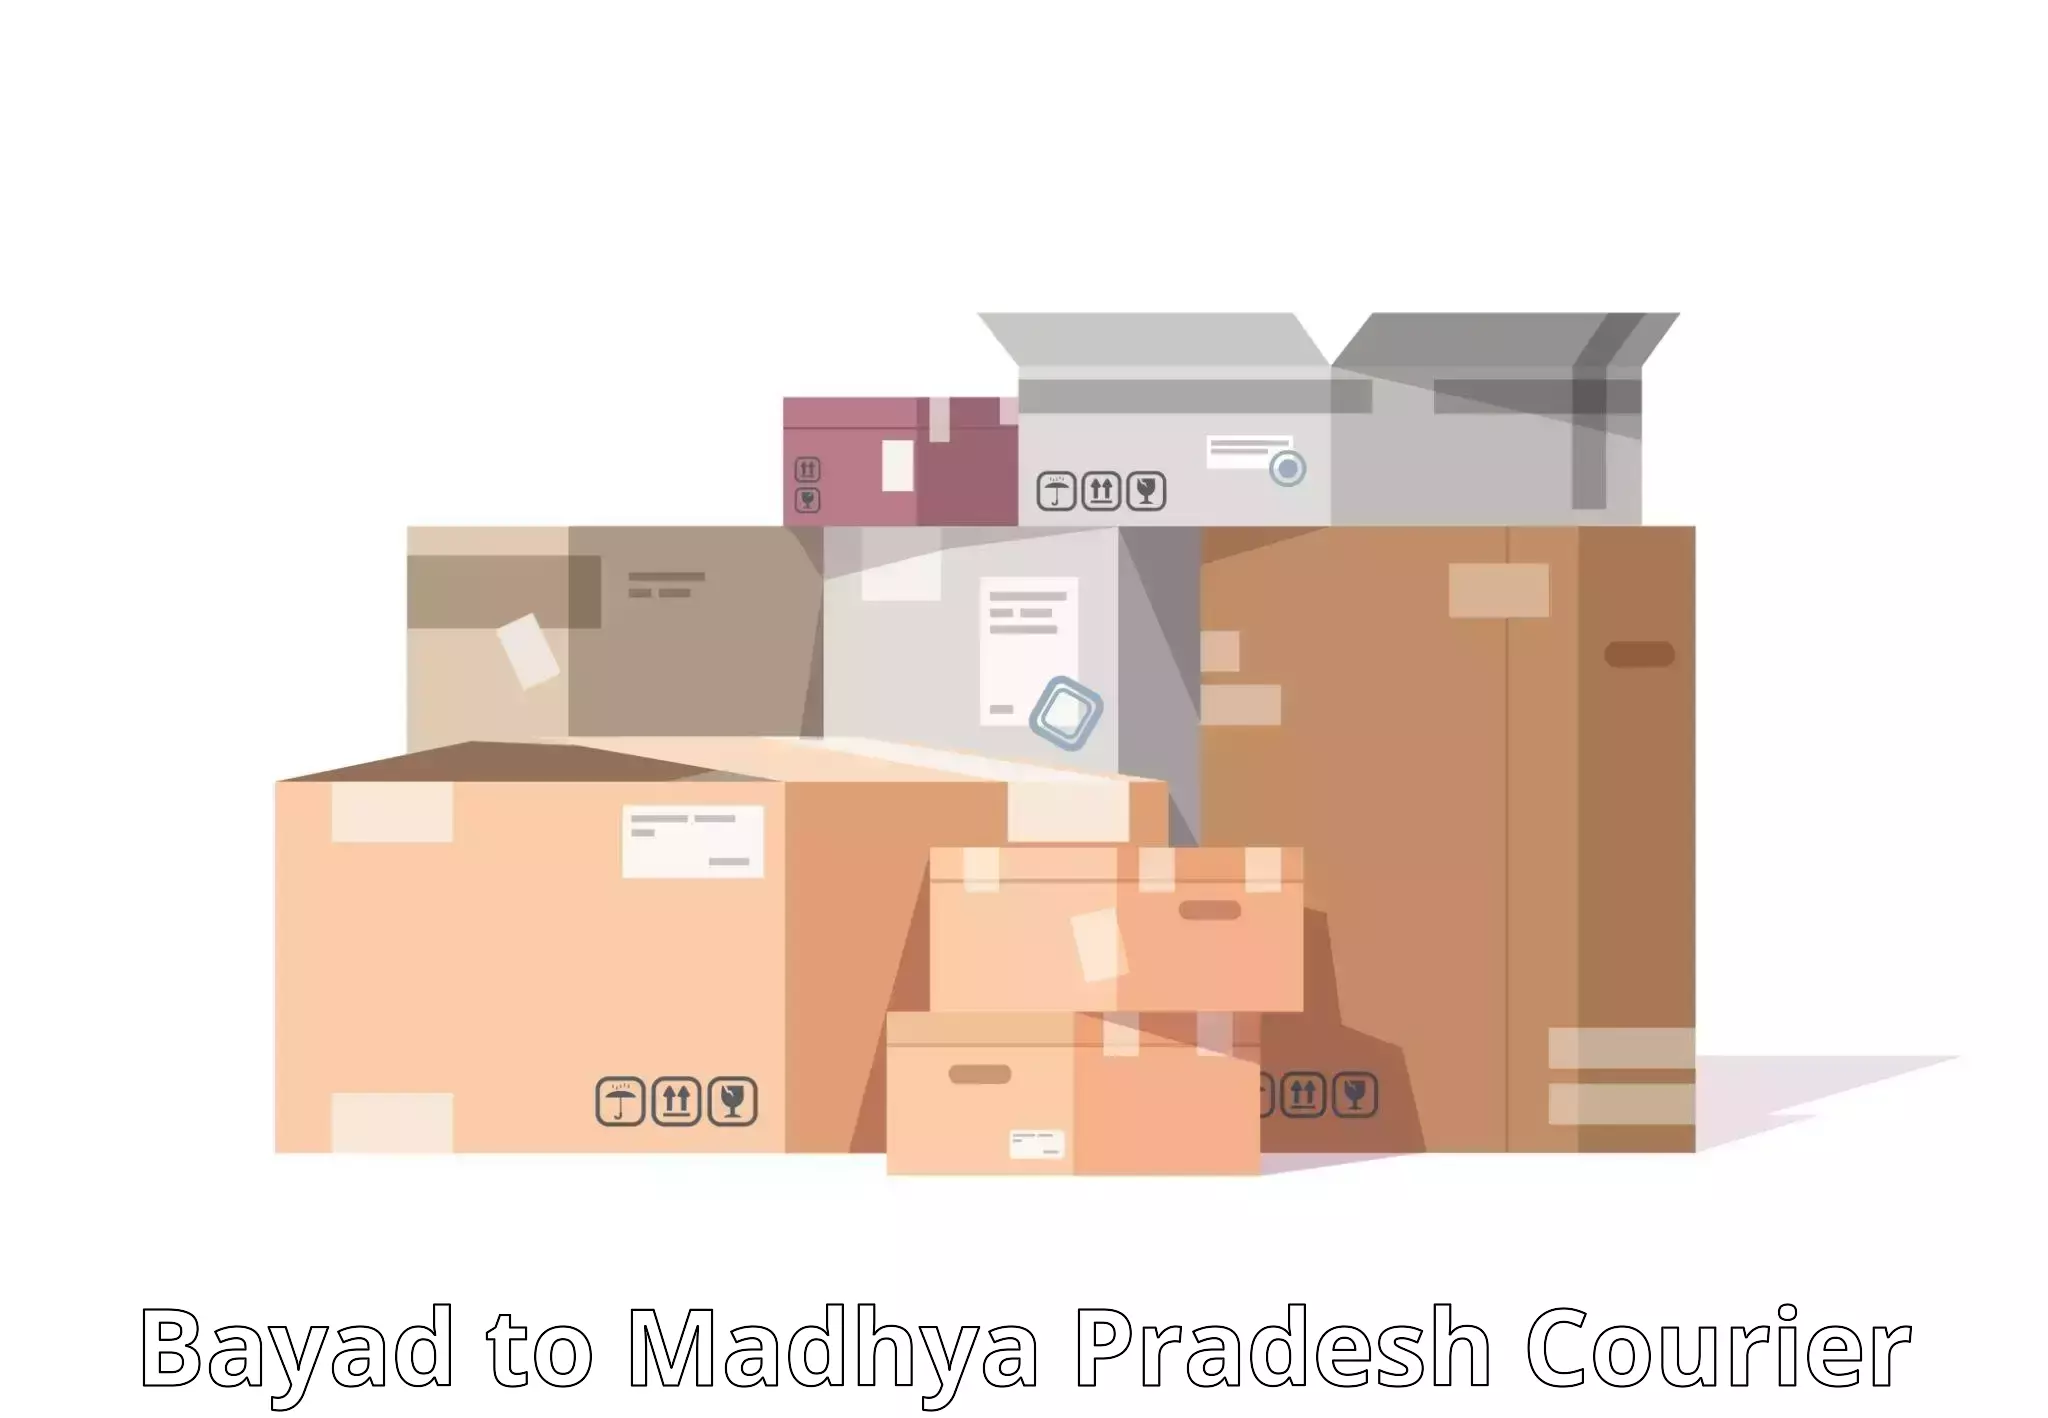 Efficient package consolidation in Bayad to Madhya Pradesh